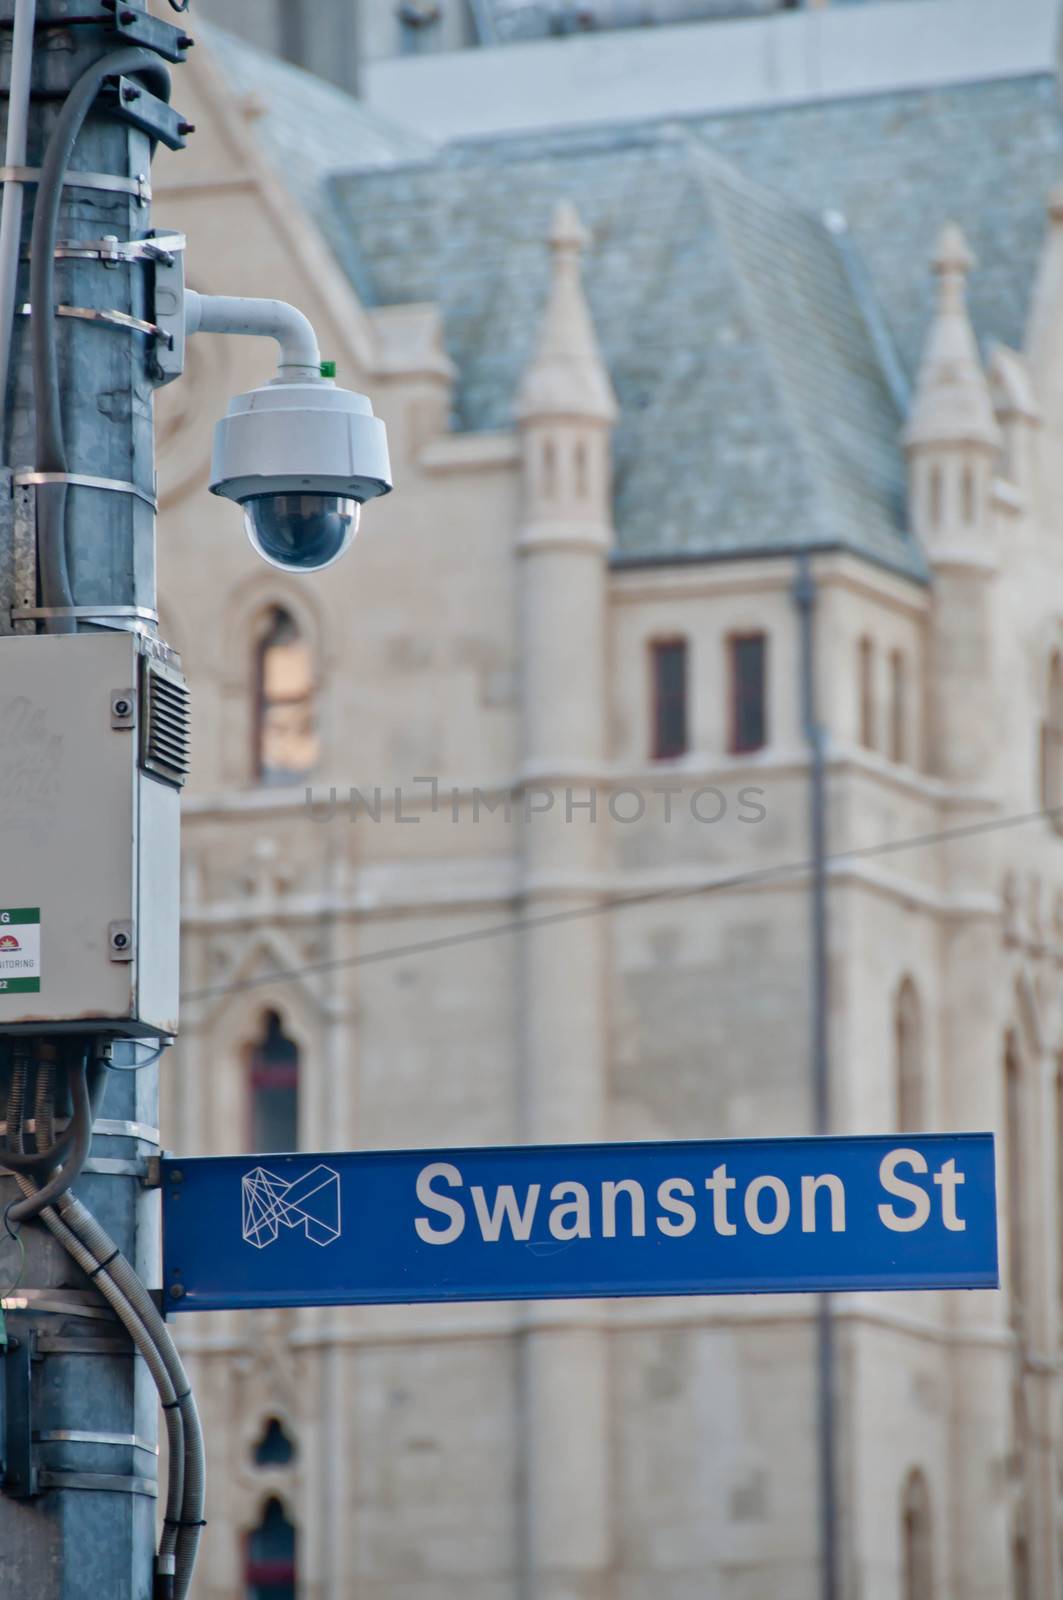 MELBOURNE, AUSTRALIA - JULY 29, 2018: Surveillance CCTV street outdoor camera watching pedestrian near St Paul's cathedral church in city center to prevent terrorism. The photo is taken in the afternoon.